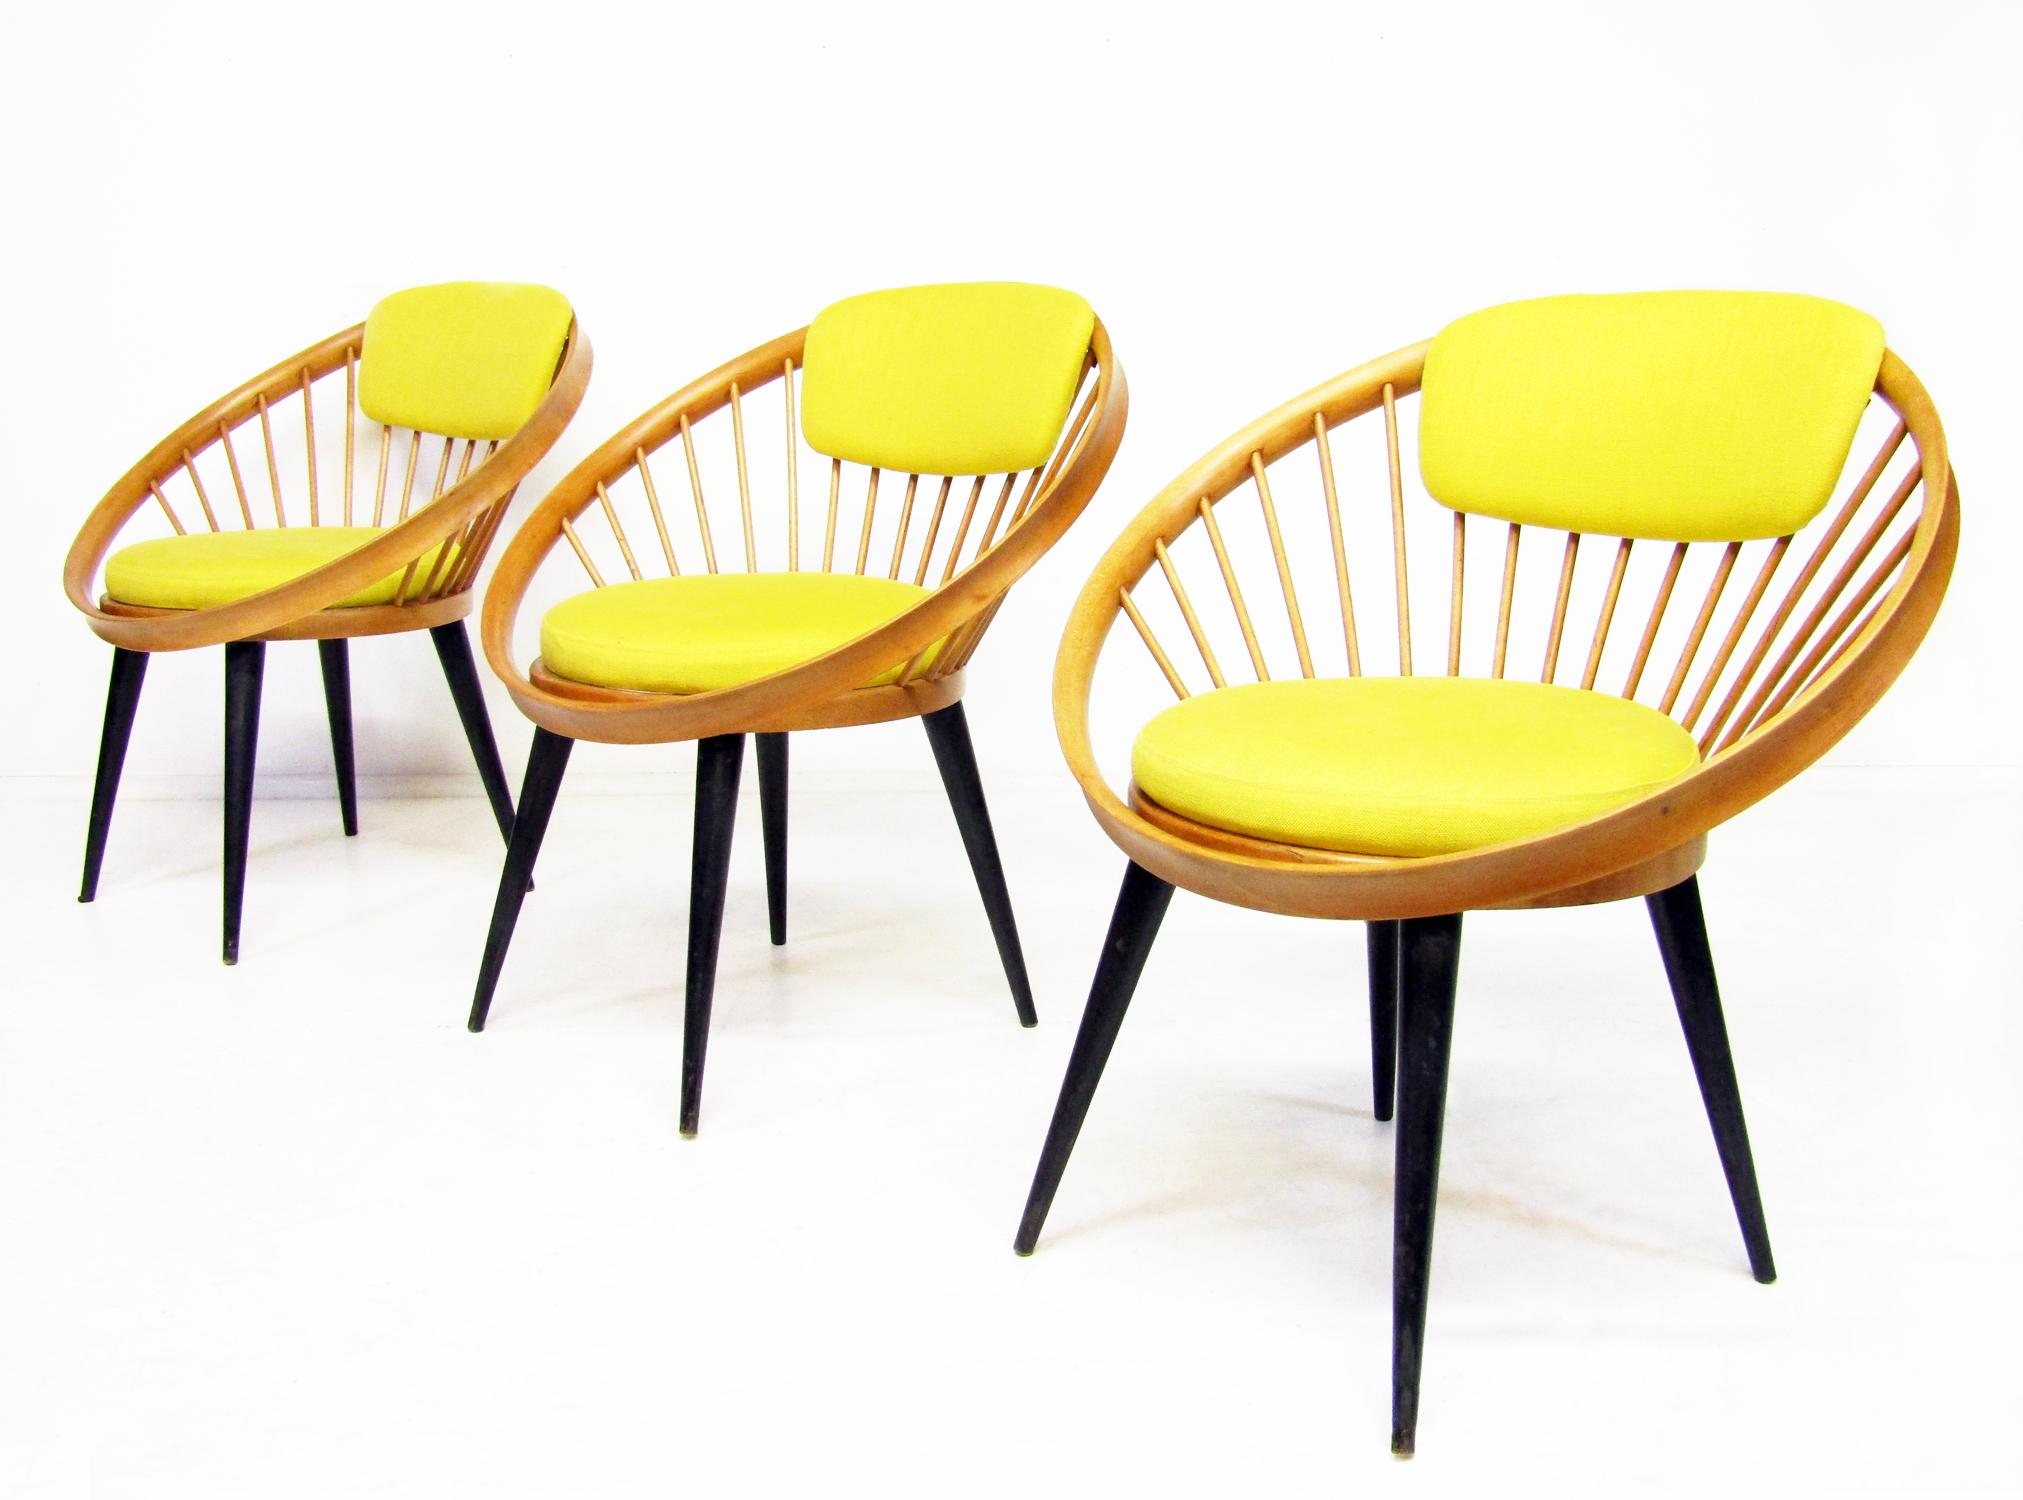 Three beautiful 1950s Laminett Circle chairs by Swedish designer Yngve Ekstrom.

With striking hoop frames on tapered legs, the seat and backrest in original yellow linen fabric, they resonate with 1950s chic.

They have been fully